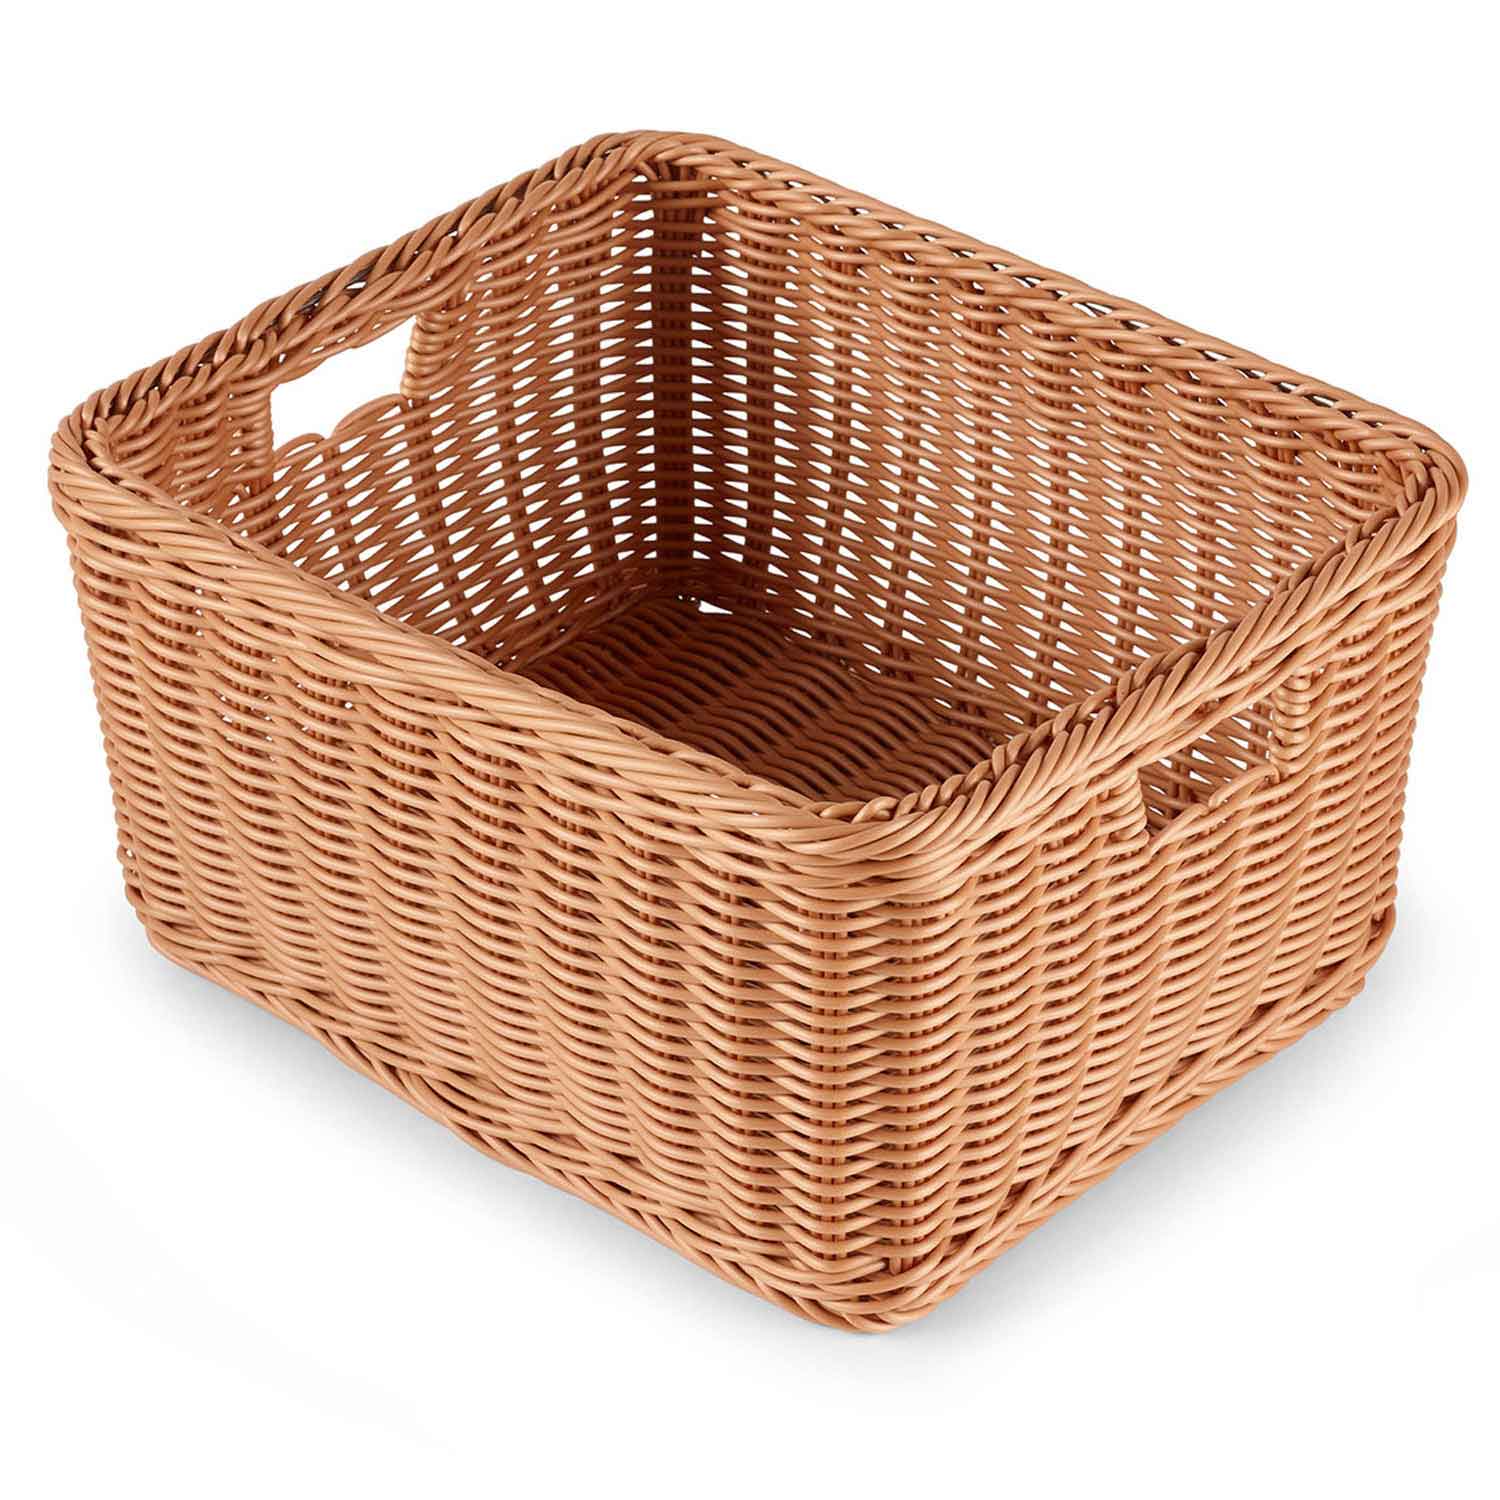 Large Plastic Woven Basket with Handles | Becker's